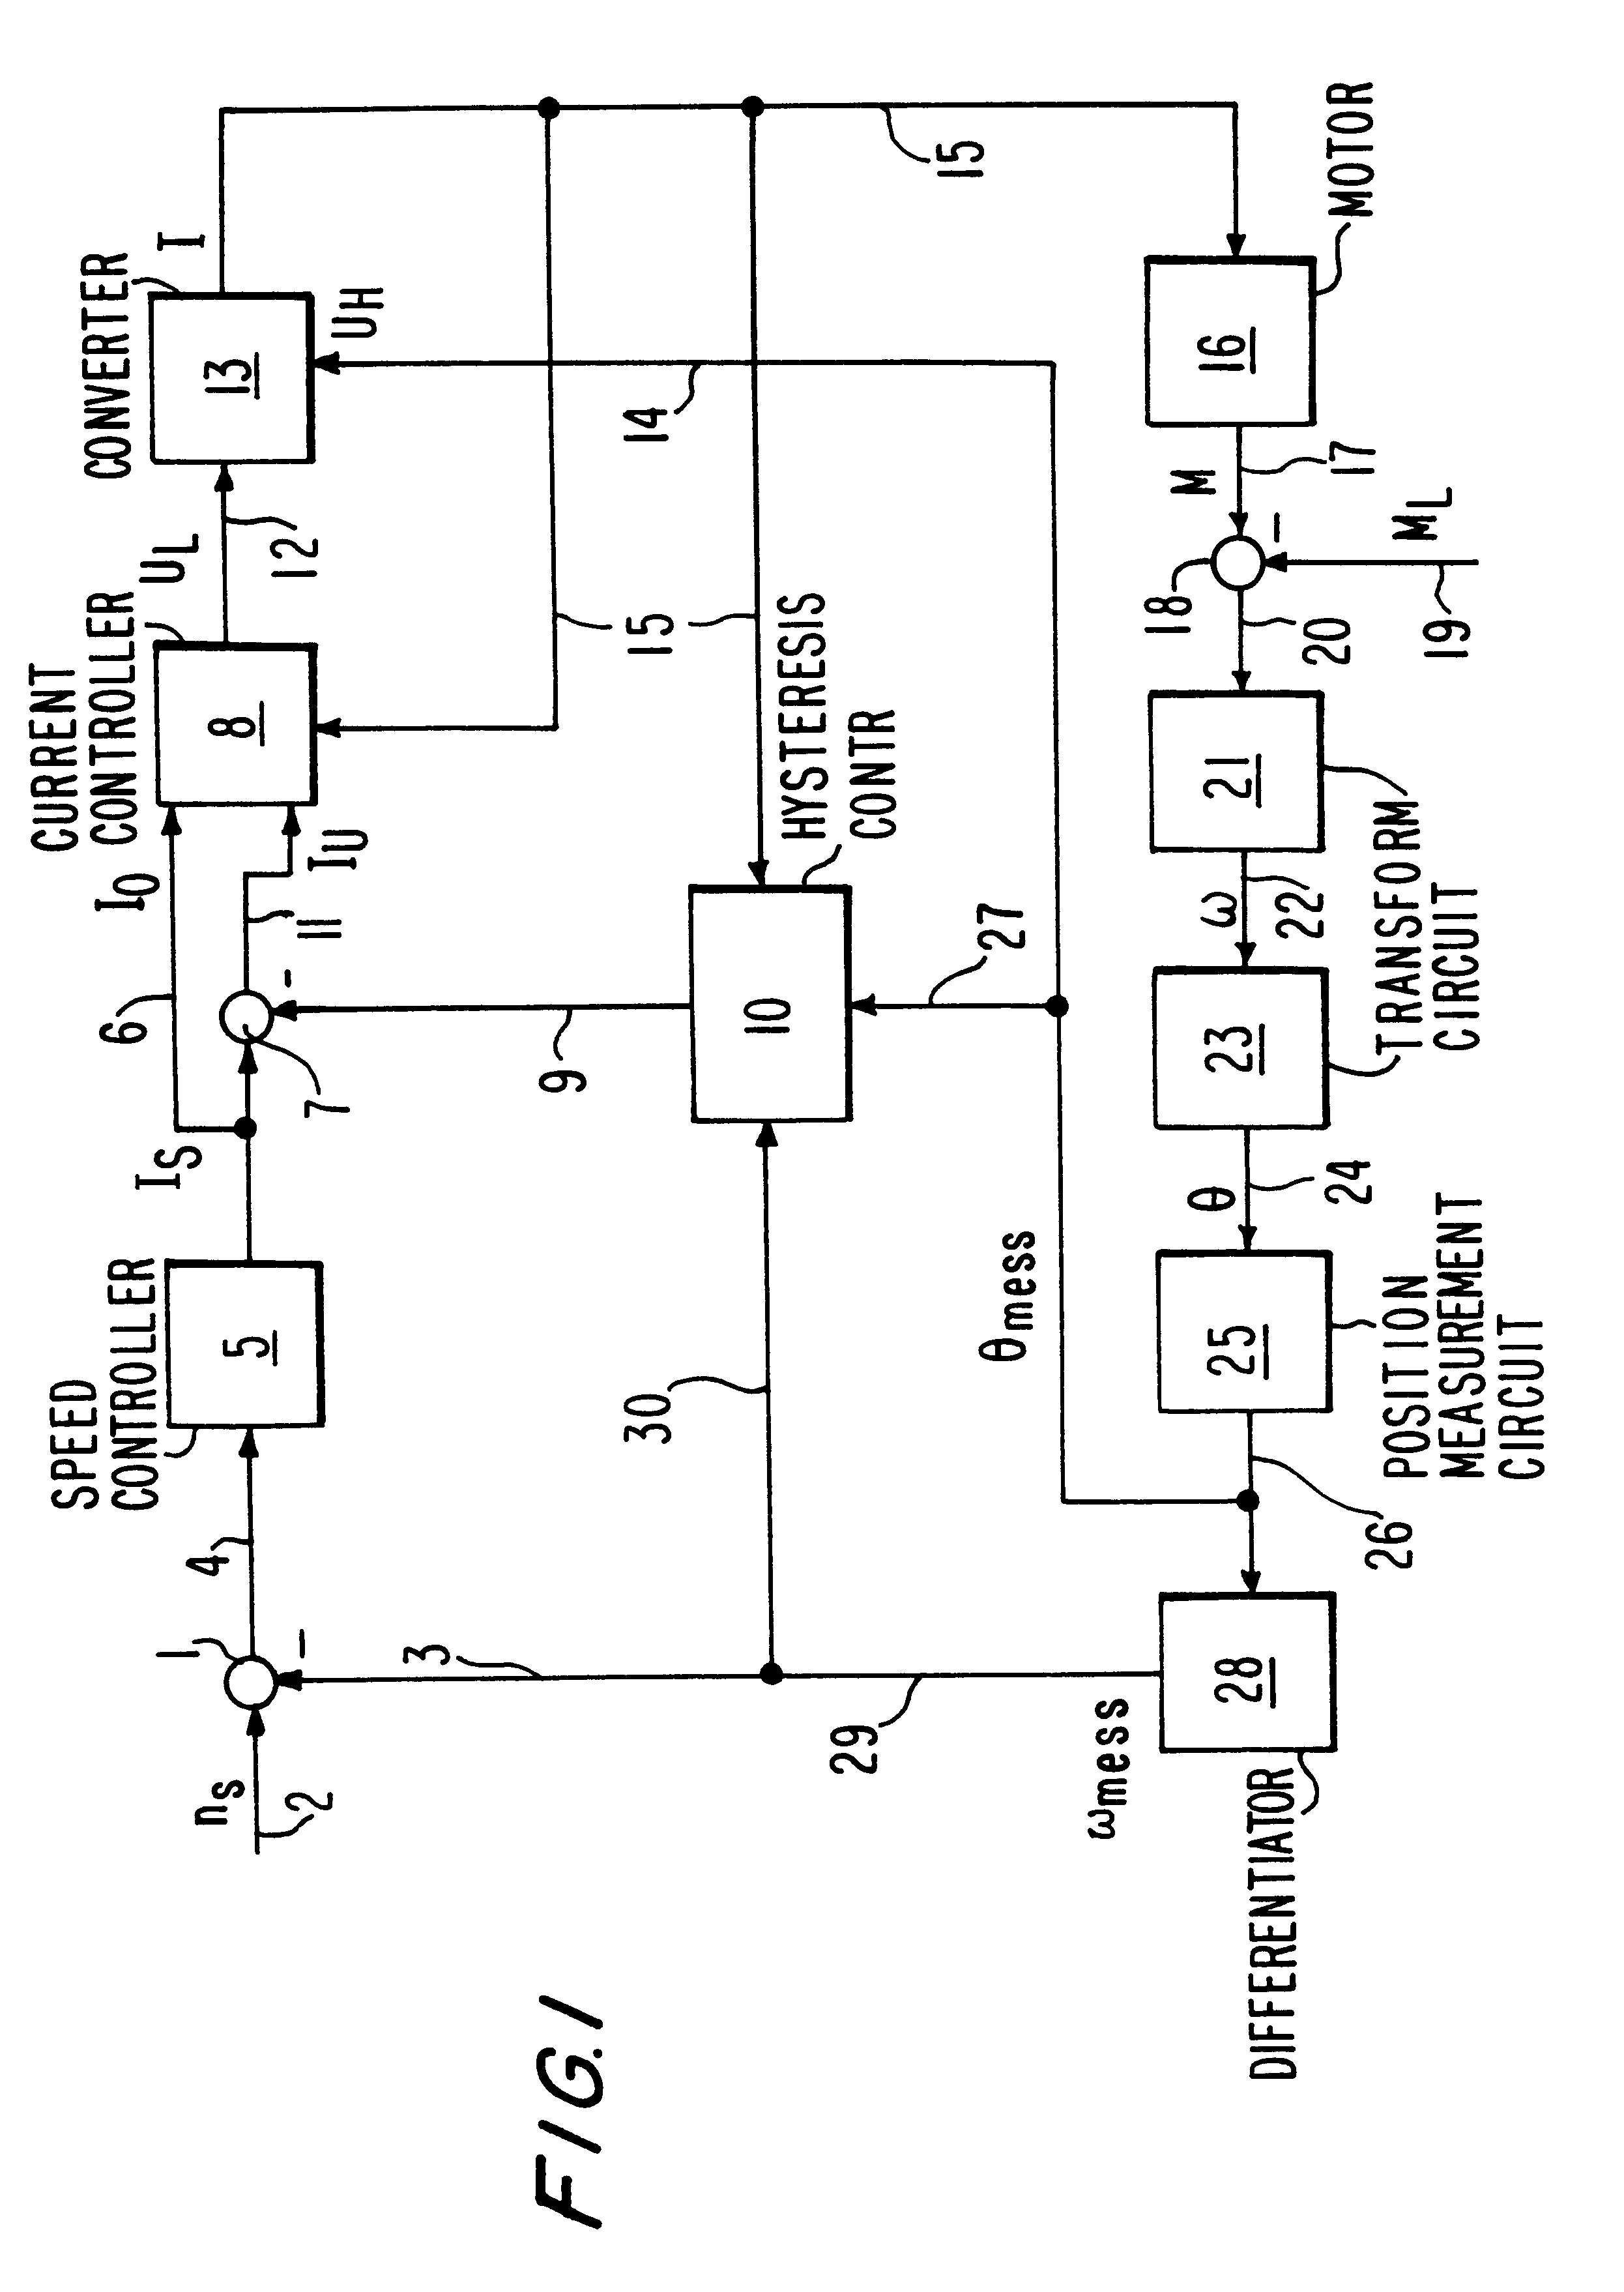 Method of controlling a frequency converter of a reluctance machine